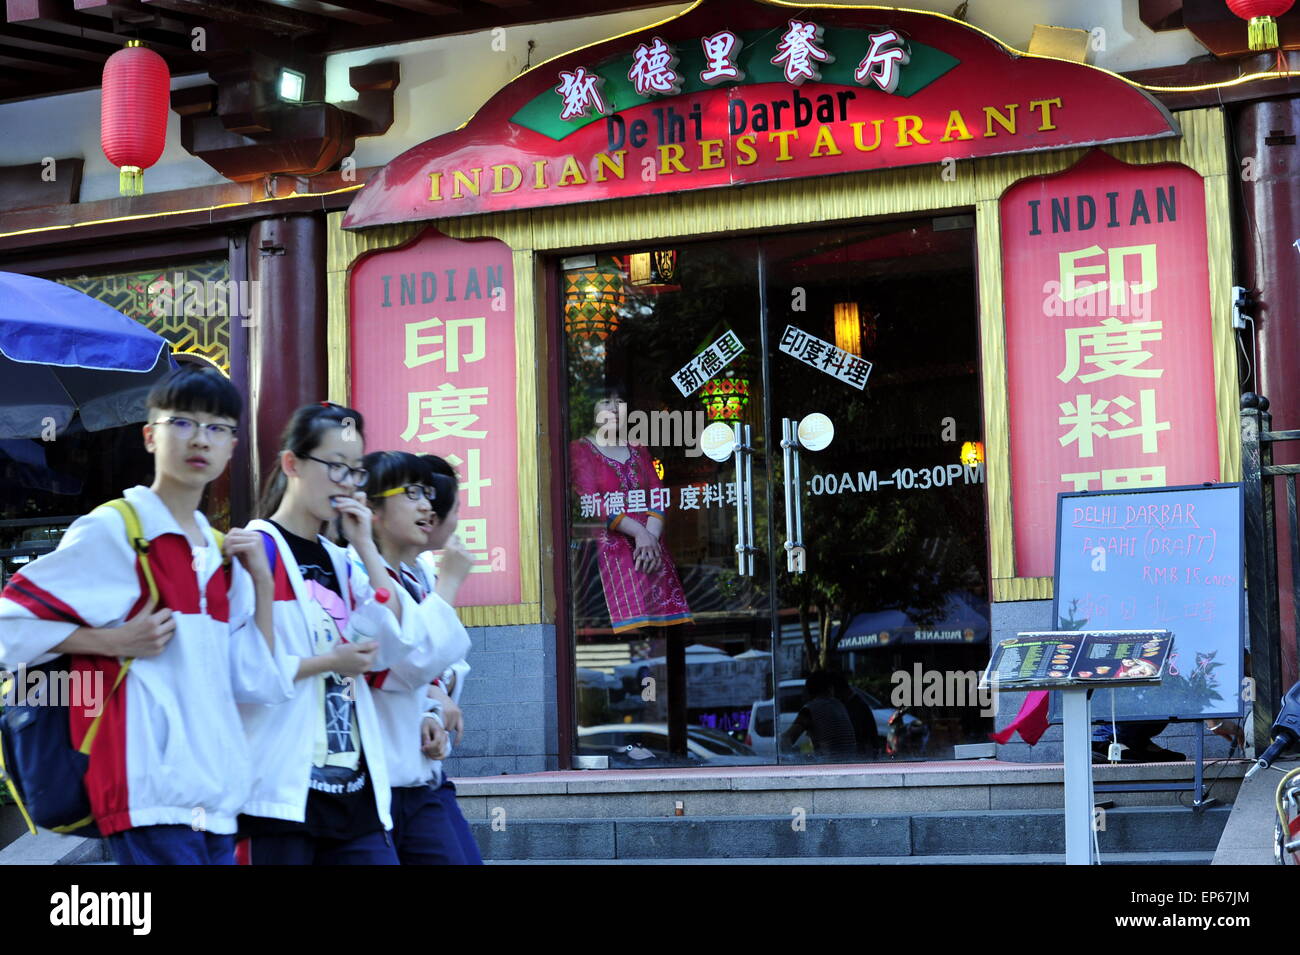 (150514) -- XI'AN, May 14, 2015 (Xinhua) -- Students walk past the Delhi Indian Restaurant in Xi'an, northwest China's Shaanxi Province, May 12, 2015. The restaurant specialized in Indian food has attracted lots of Chinese during the past 7 years. (Xinhua/Yuan Jingzhi) (mp) Stock Photo